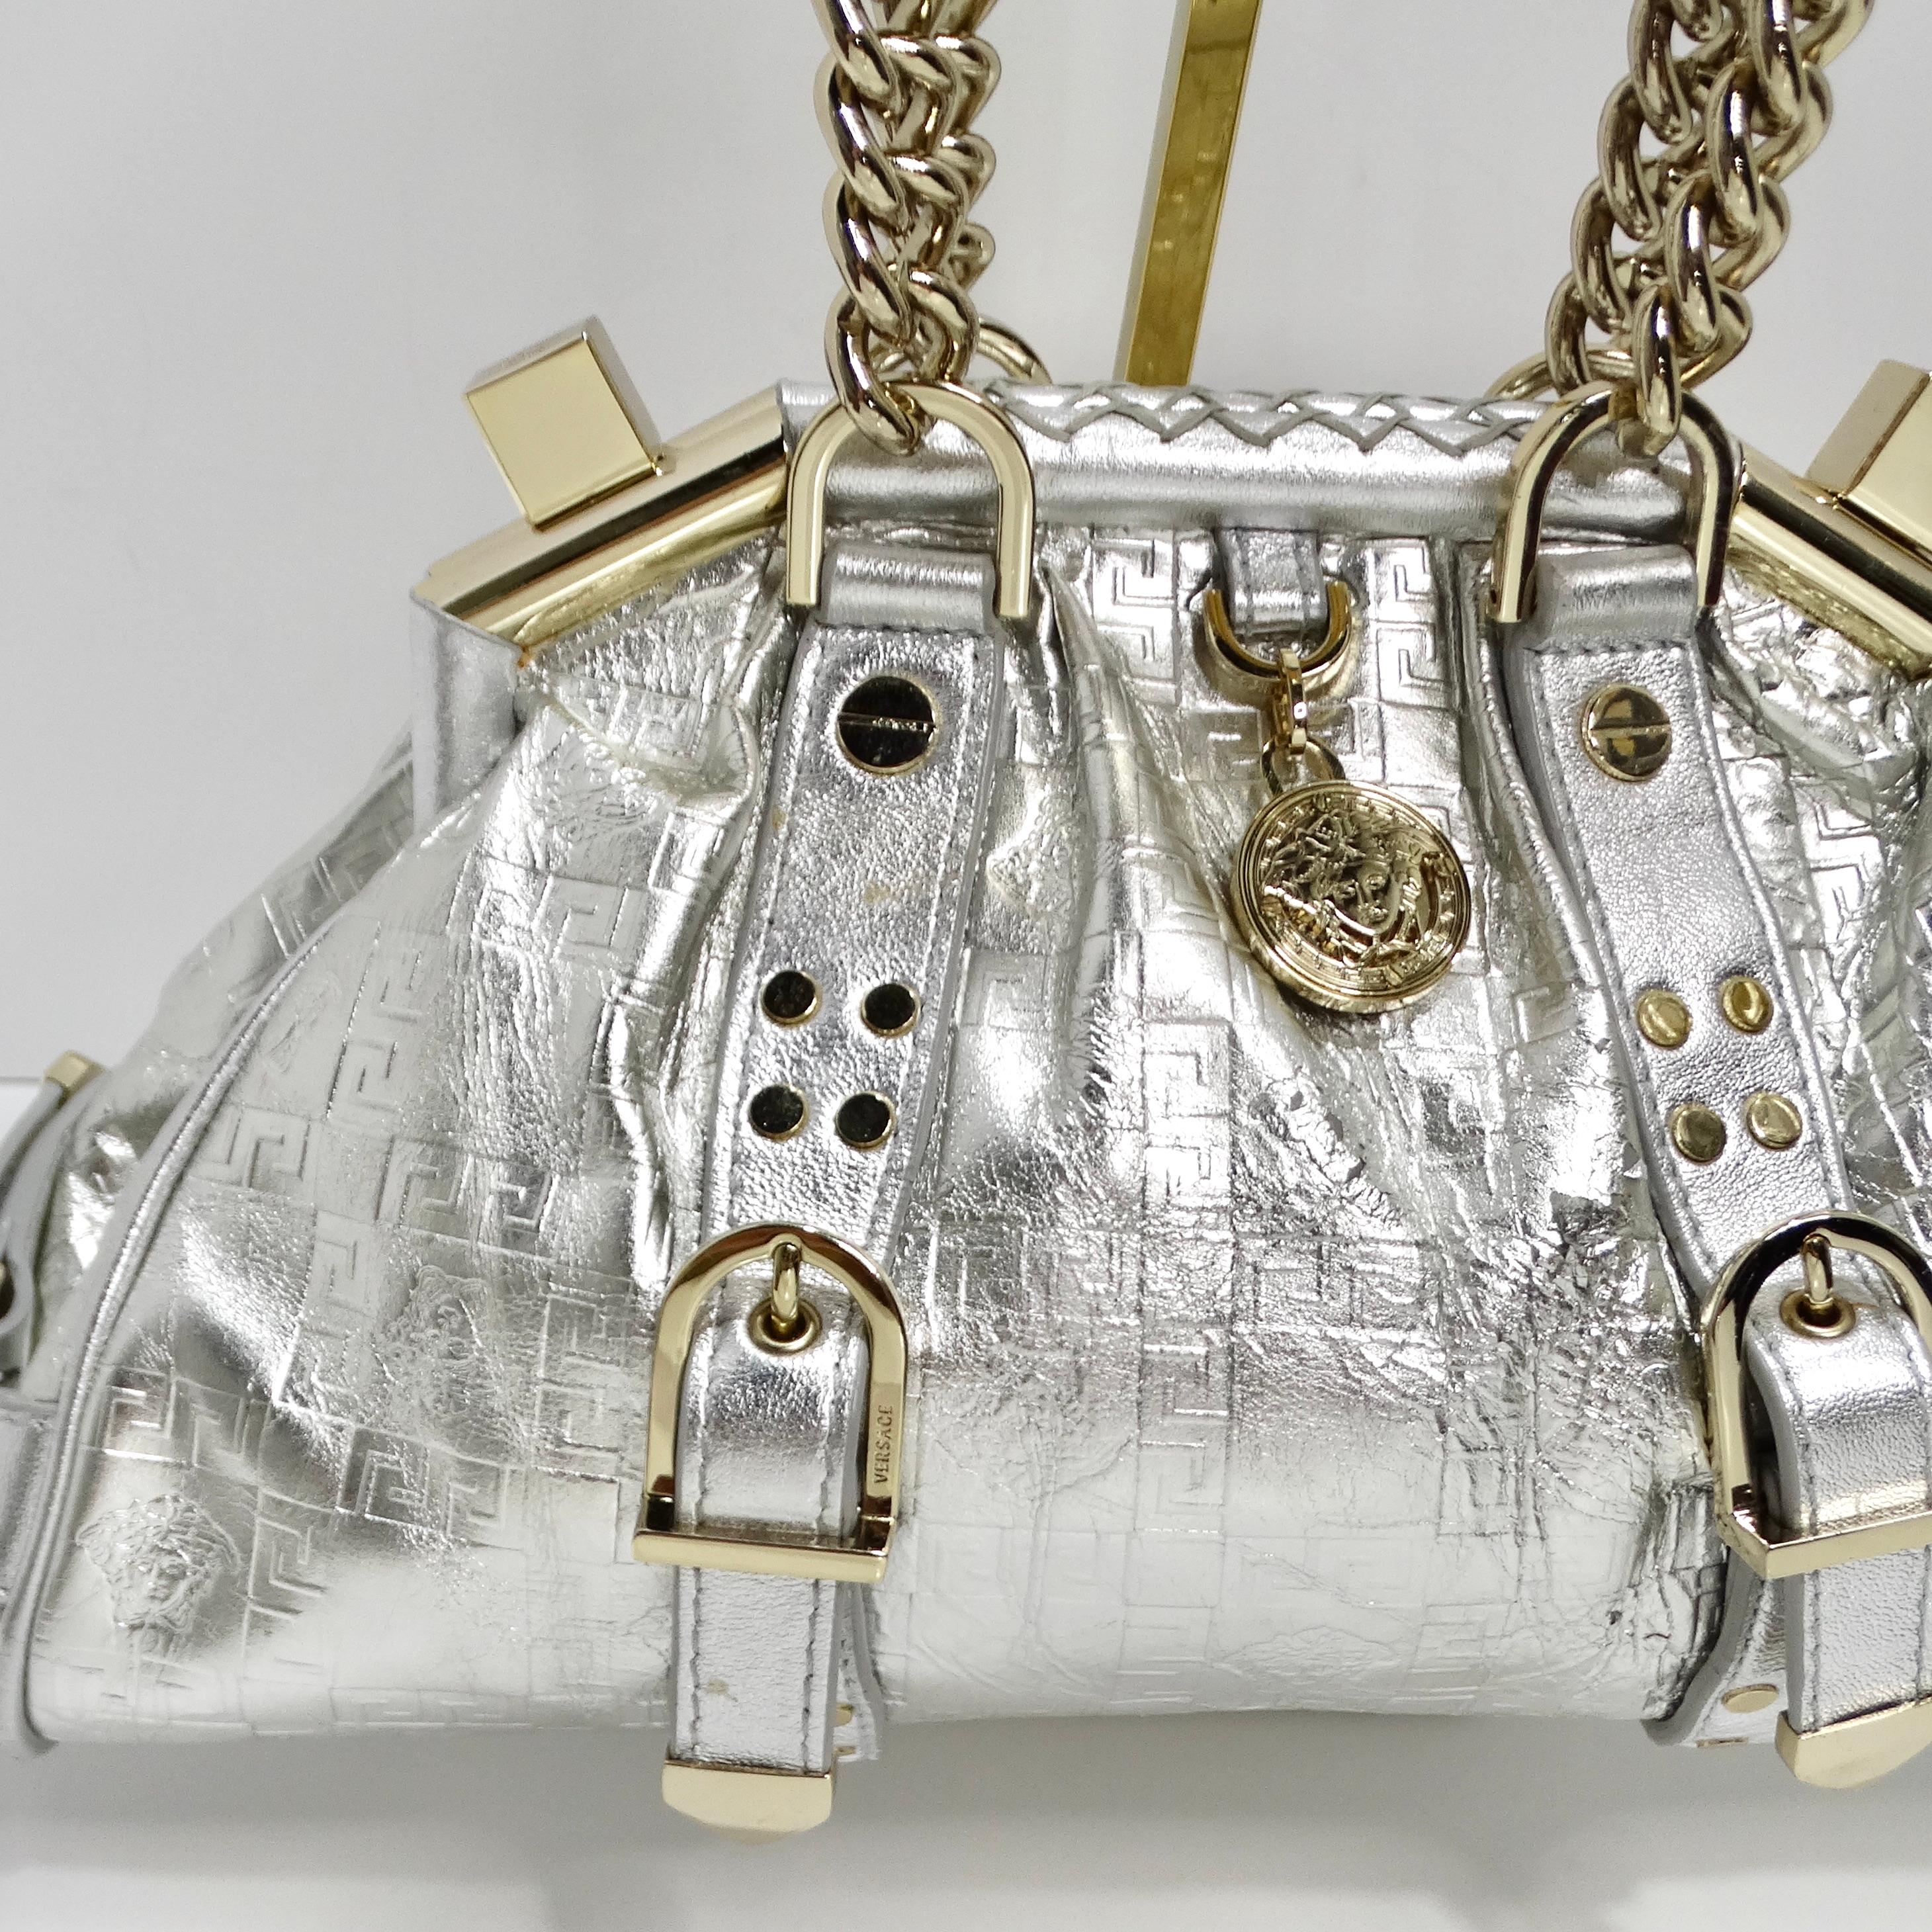 Presenting the Versace 1990s Silver Leather Medusa Shoulder Bag, a dazzling statement piece that captures the bold and luxurious essence of vintage Versace. This iconic handbag is crafted from striking metallic silver leather, creating a captivating